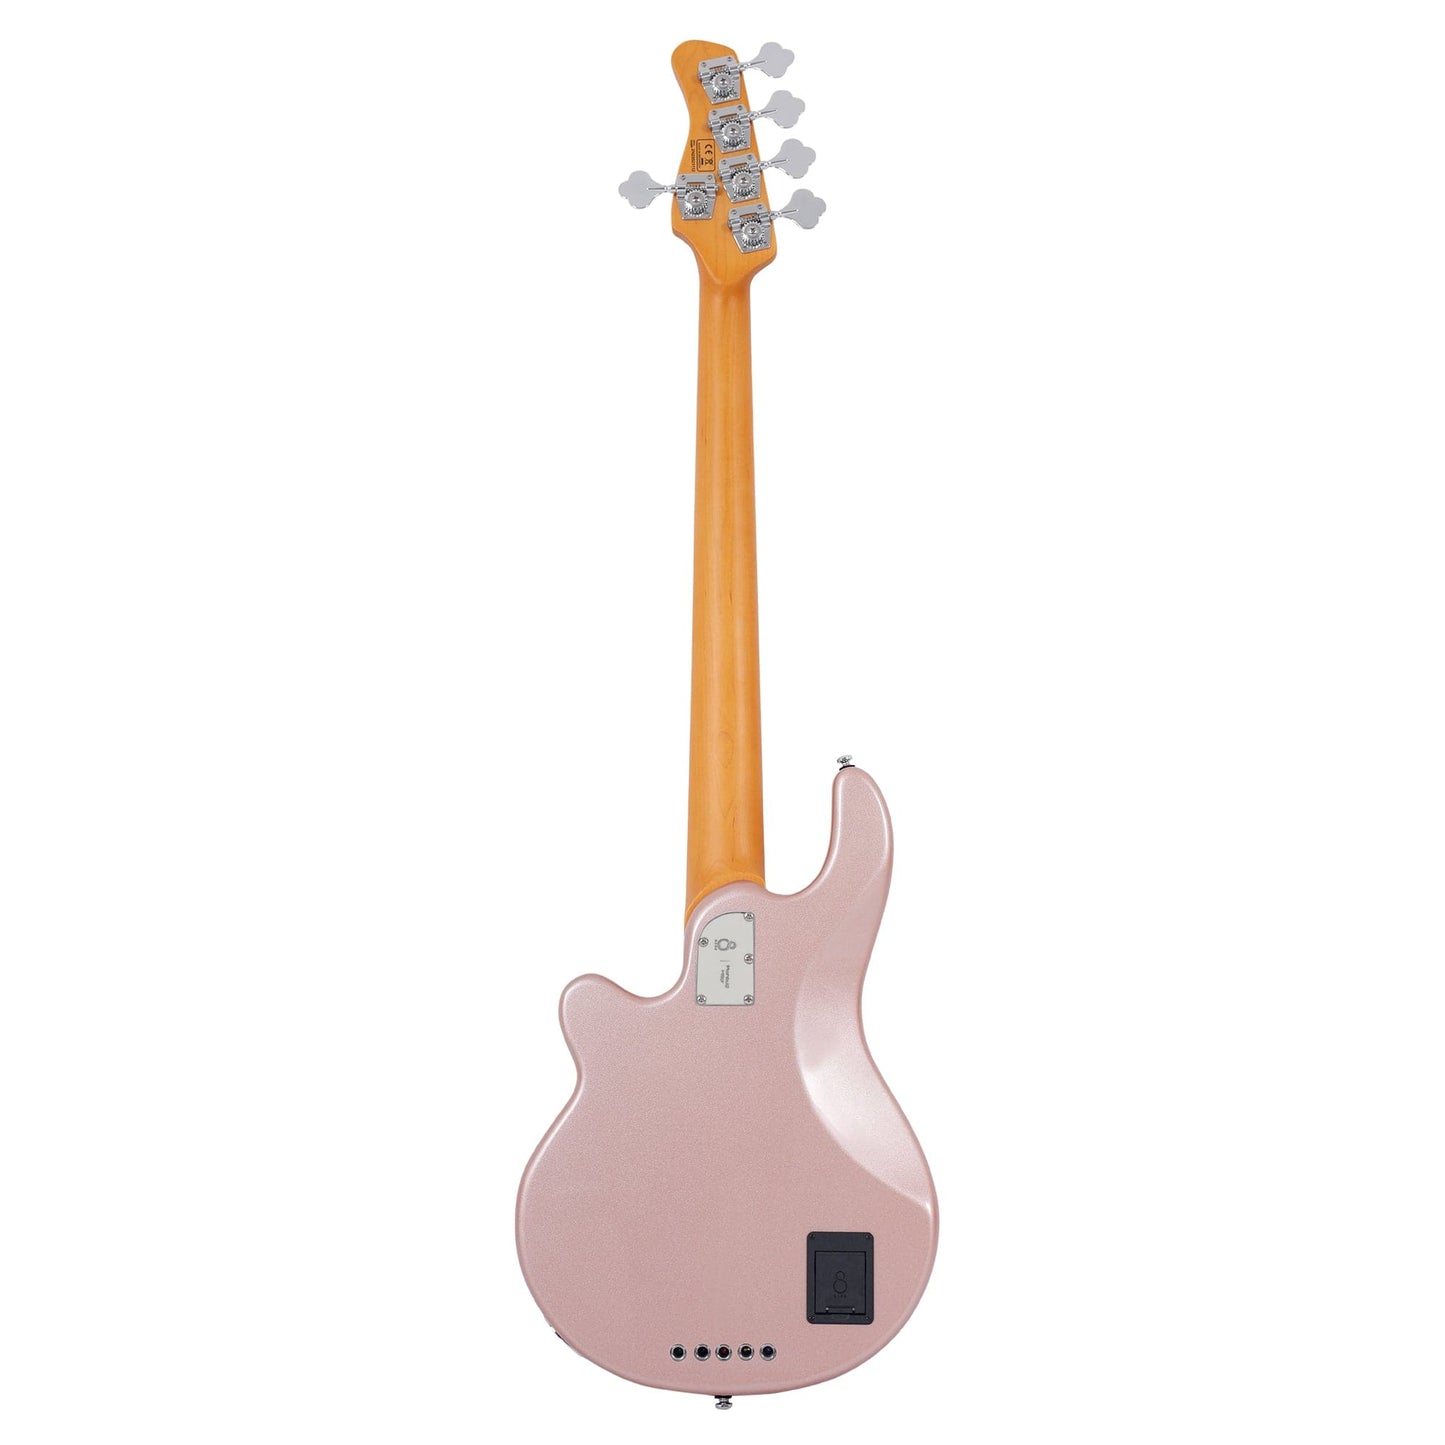 Sire Marcus Miller Z3 5-String Rose Gold Bass Guitars / 5-String or More